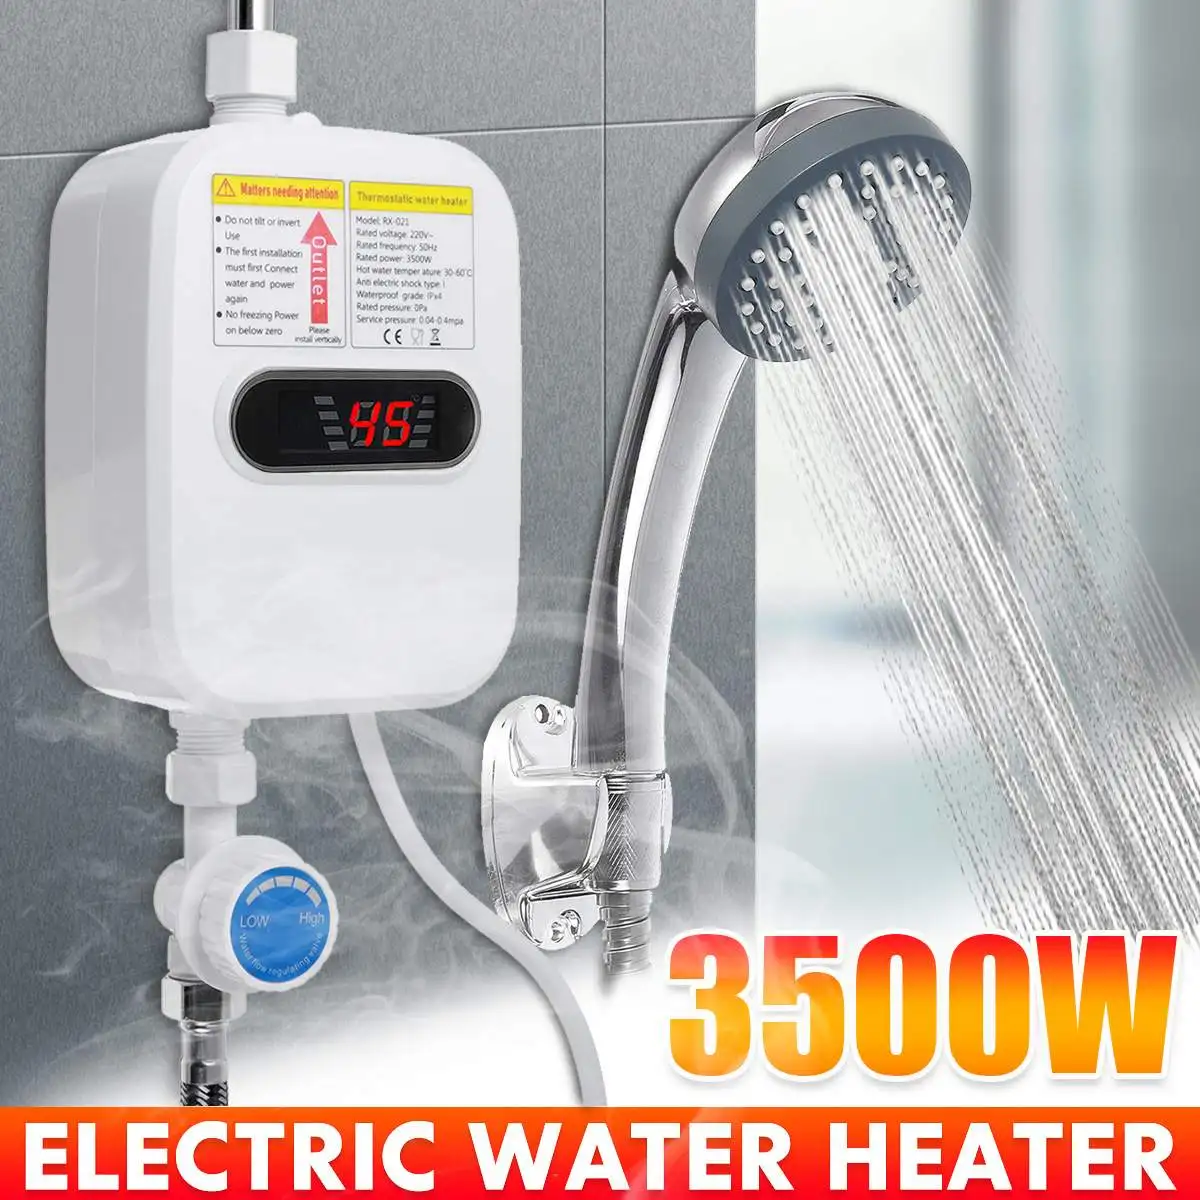 https://ae01.alicdn.com/kf/Sc8b72763061e4c2cbc7156b6d0142f48W/3500W-Electric-Shower-Instant-Water-Heater-3S-Heating-Bathroom-Kitchen-Tankless-Electric-Water-Heater-Temperature-Display.jpg